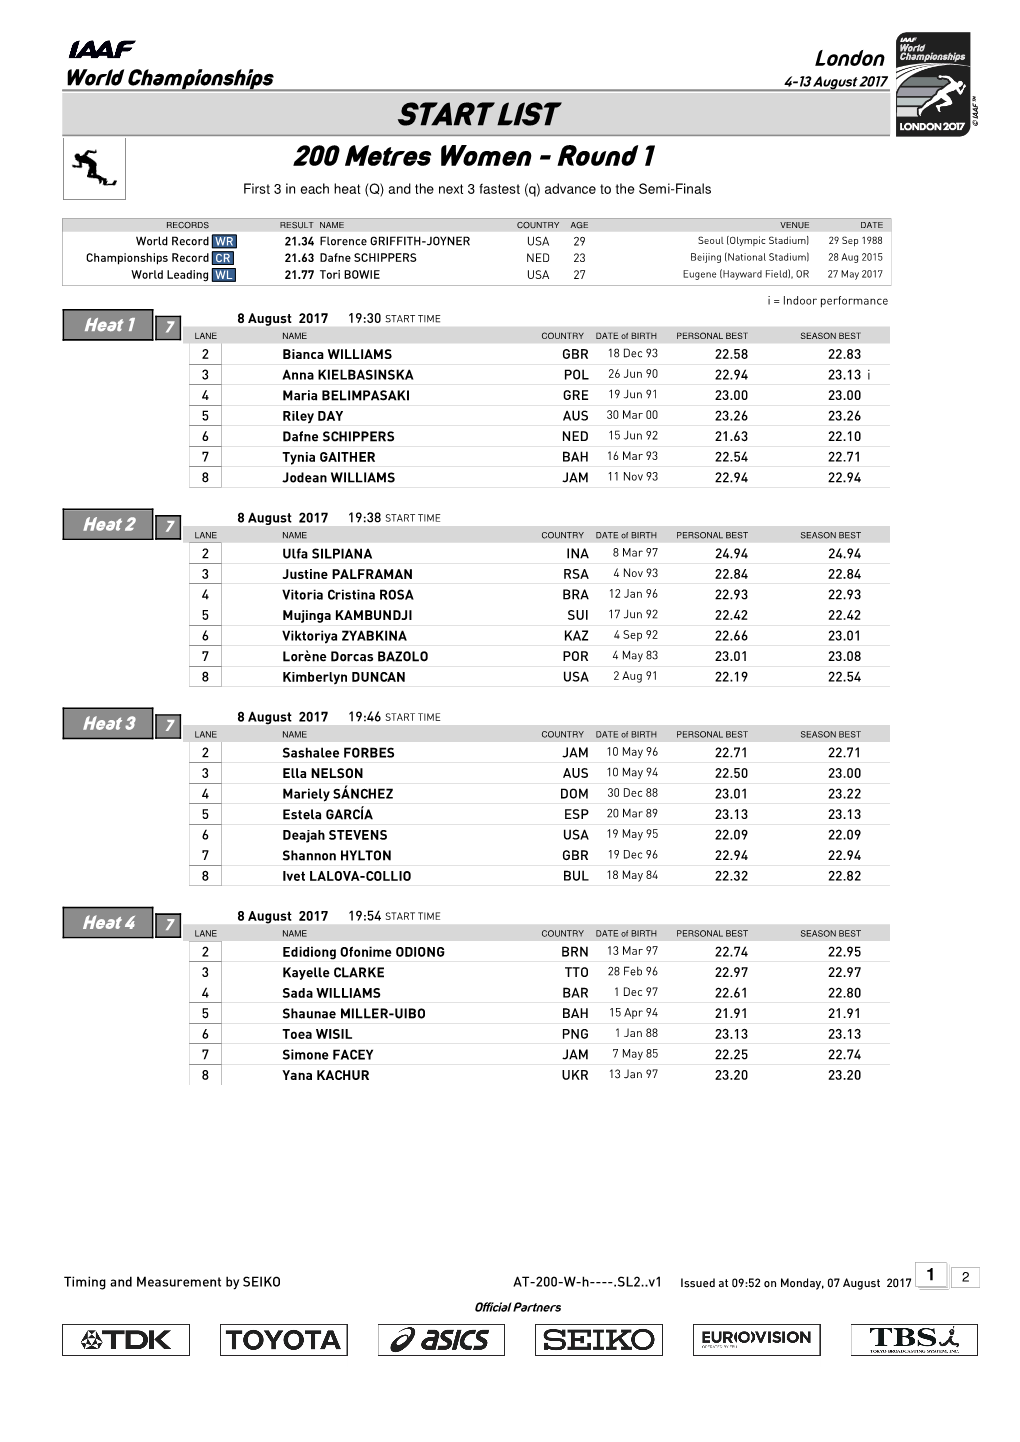 START LIST 200 Metres Women - Round 1 First 3 in Each Heat (Q) and the Next 3 Fastest (Q) Advance to the Semi-Finals